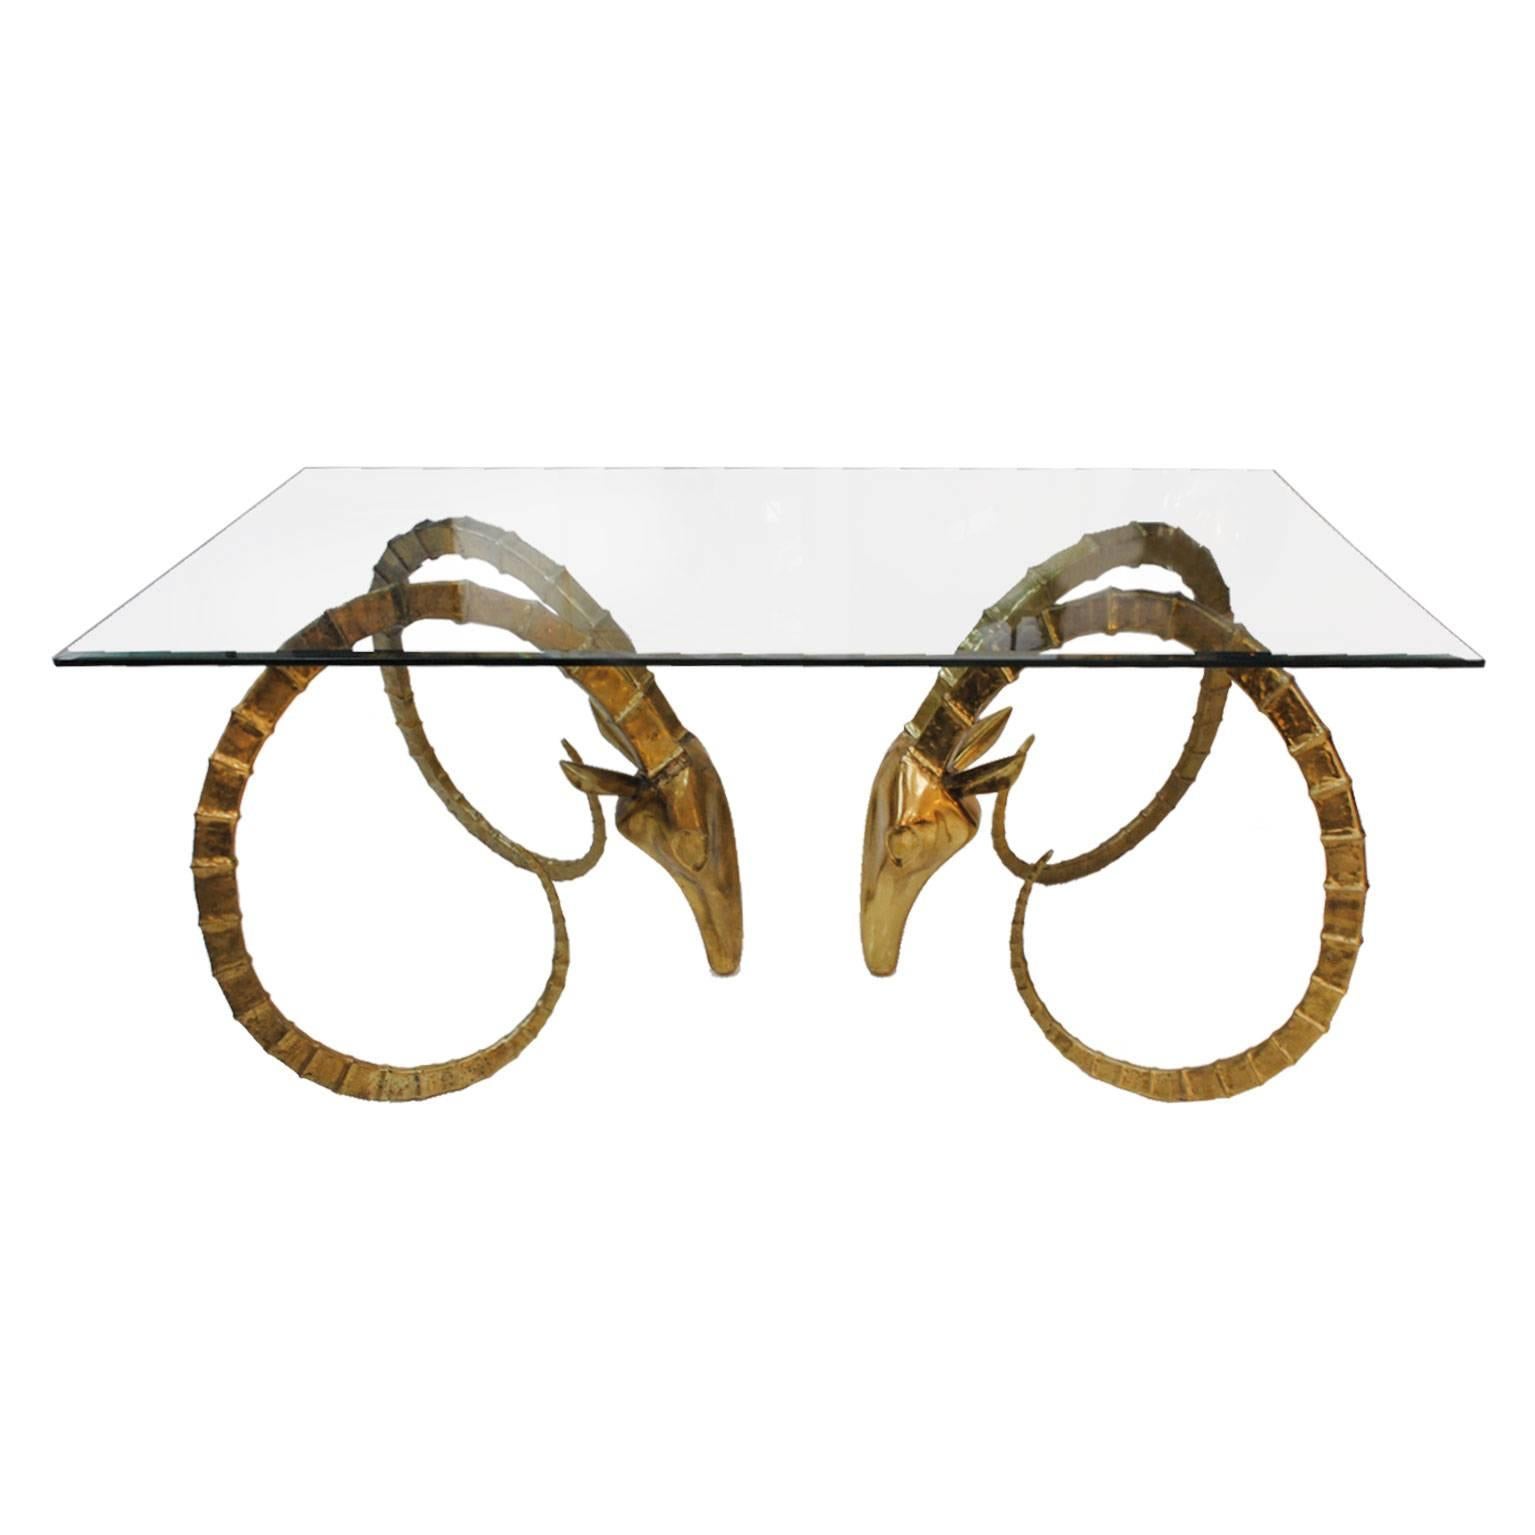 Sculptural French table designed by Alain Chervet. Marked 61/16 with signature by Alain Chervet, composed by two goat heads made of solid carved bronze.